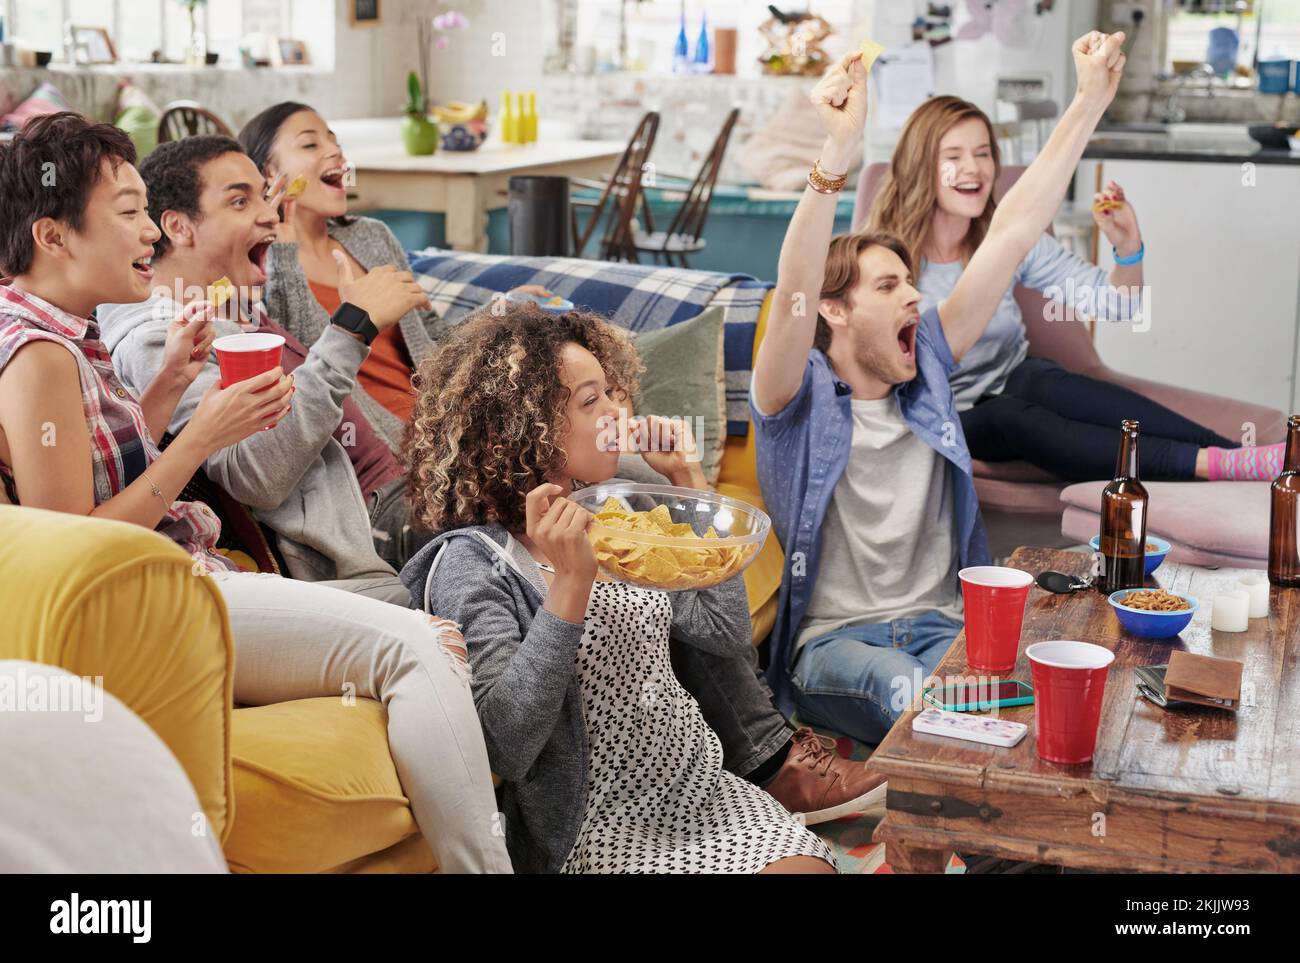 Celebration, diversity and excited people watching tv, global sports event or world cup competition winner. Pride, wow goals and team support energy Stock Photo